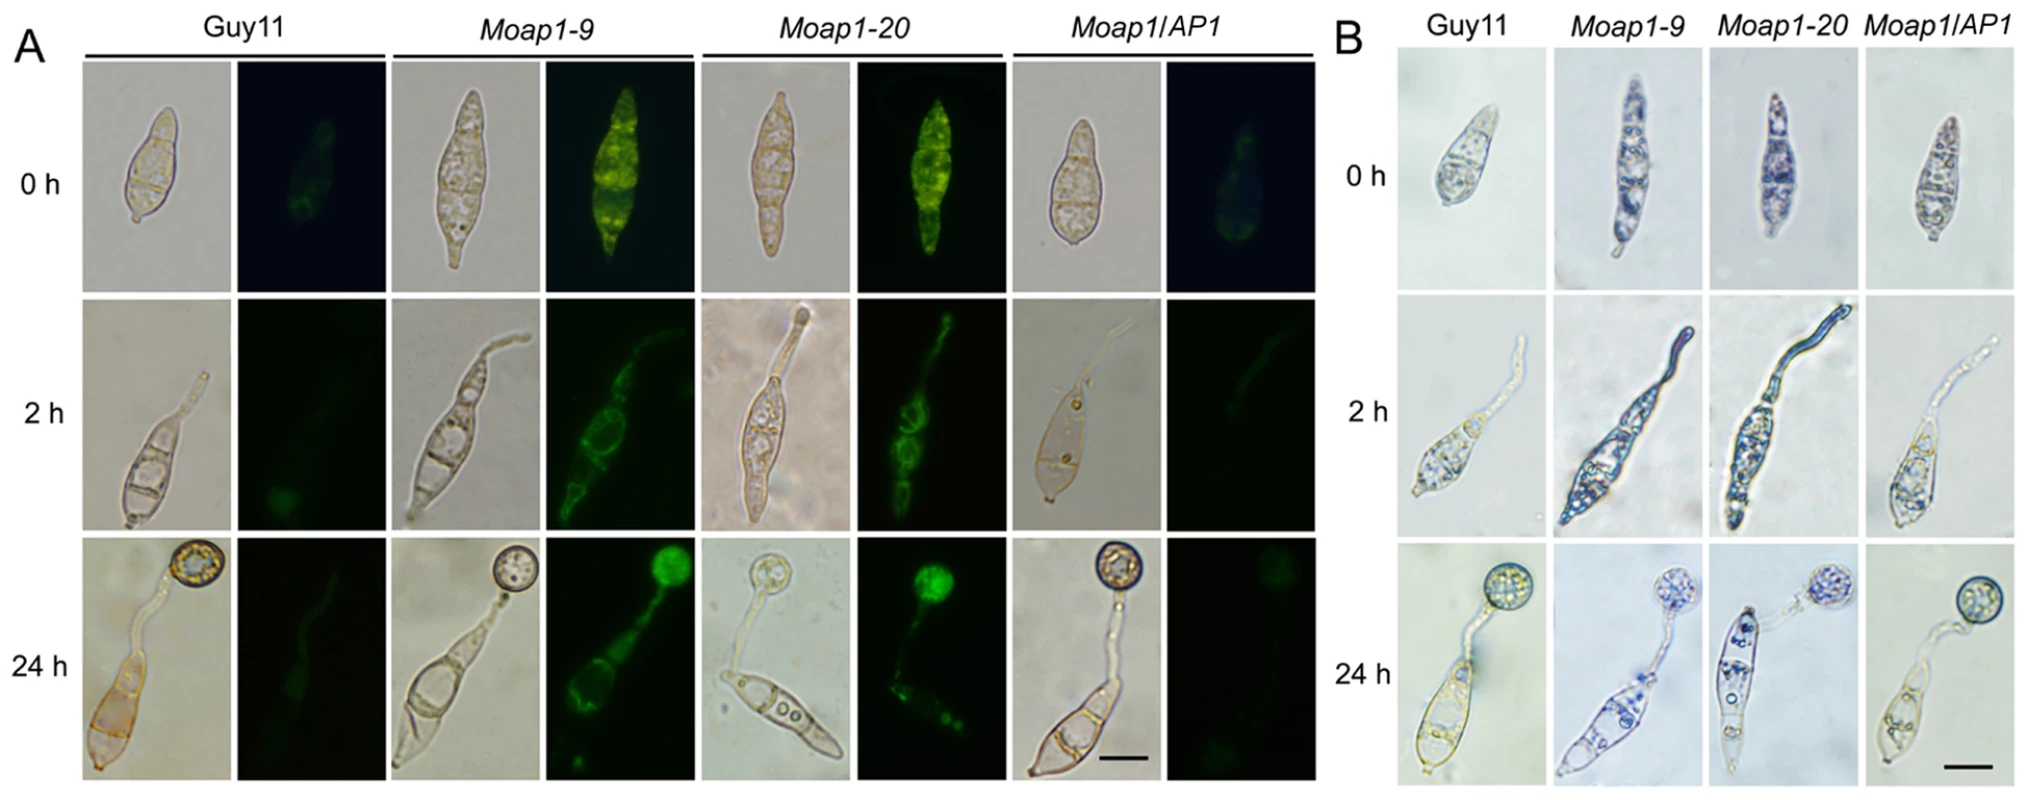 The ROS accumulation is compromised in the <i>Moap1</i> mutant during infection.